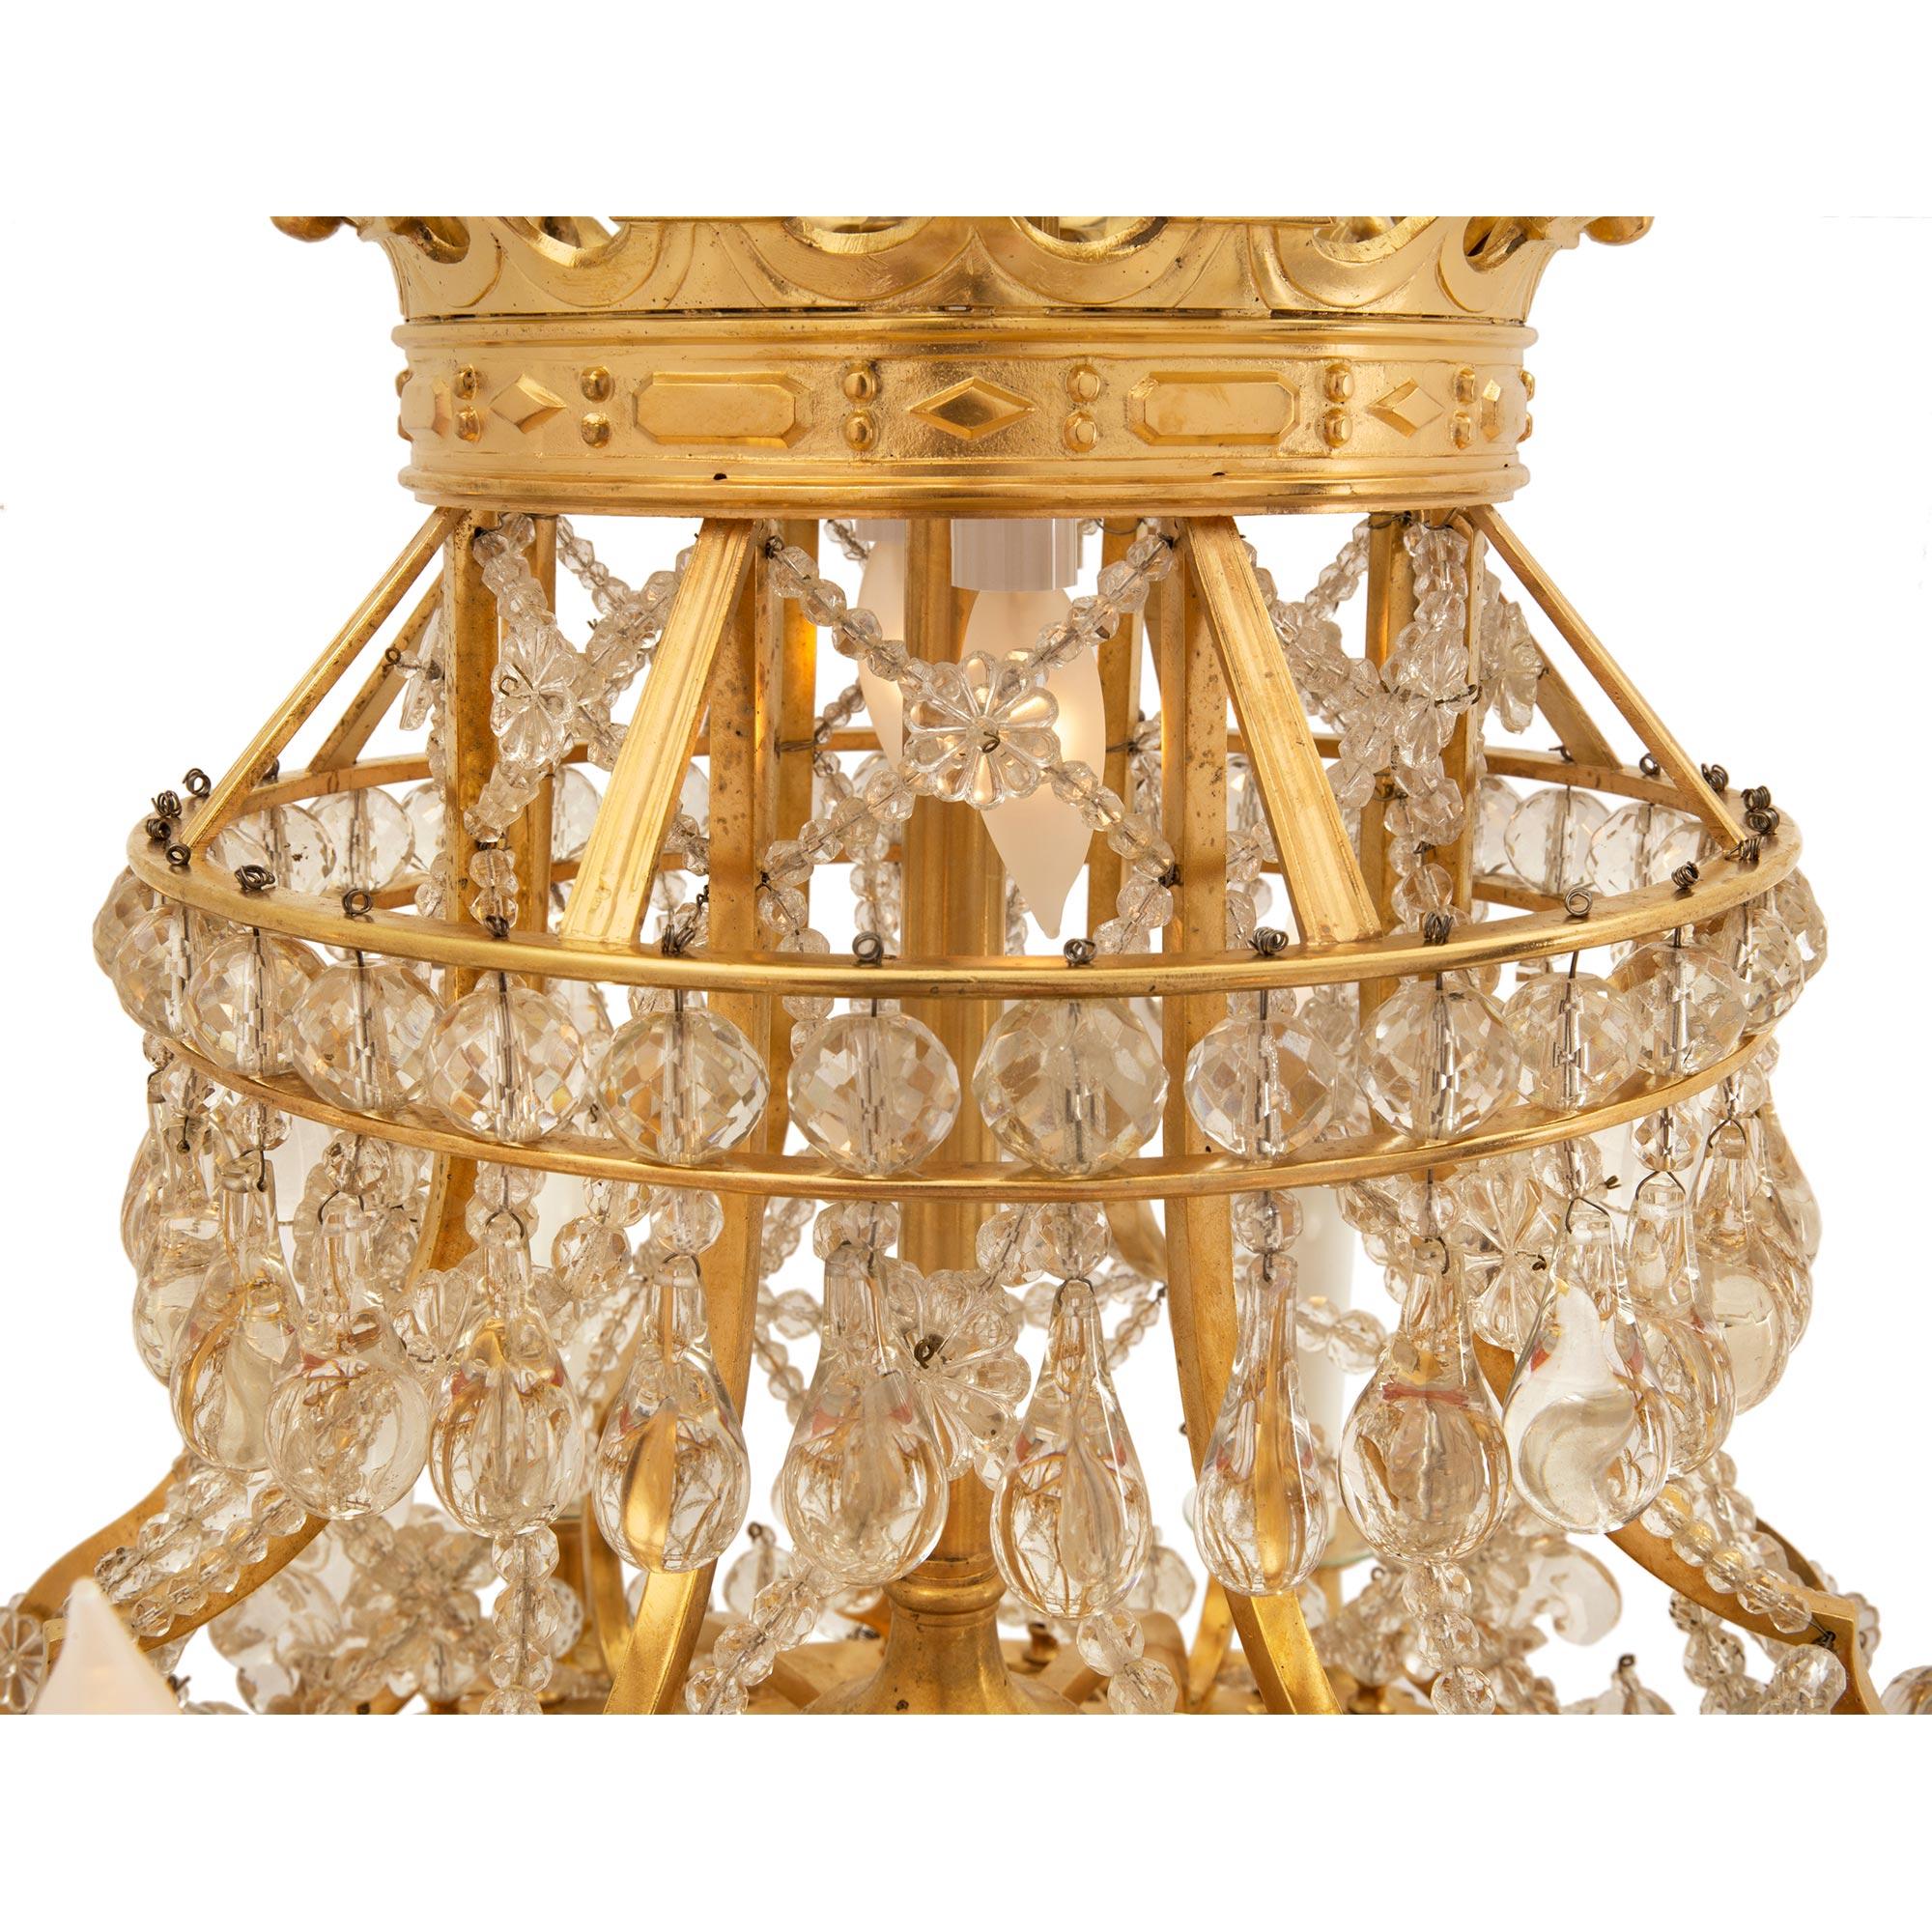 French 19th Century Louis XIV Style Ormolu, Crystal and Glass Royal Chandelier For Sale 1